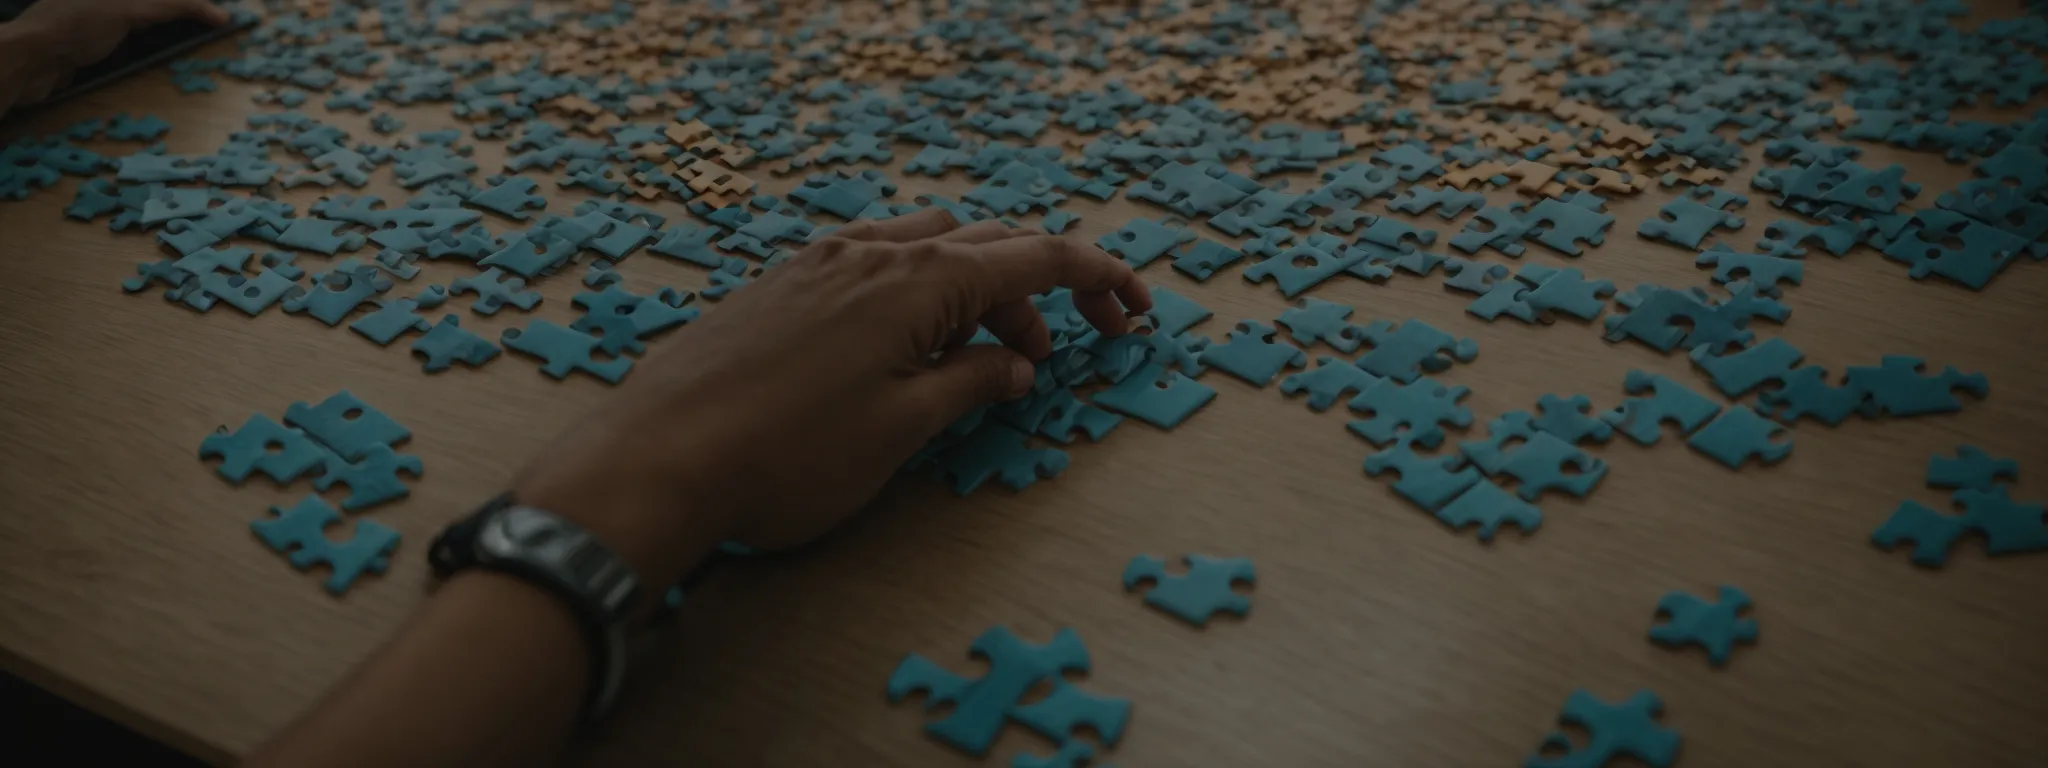 a person thoughtfully placing puzzle pieces on a board, symbolizing strategic planning.